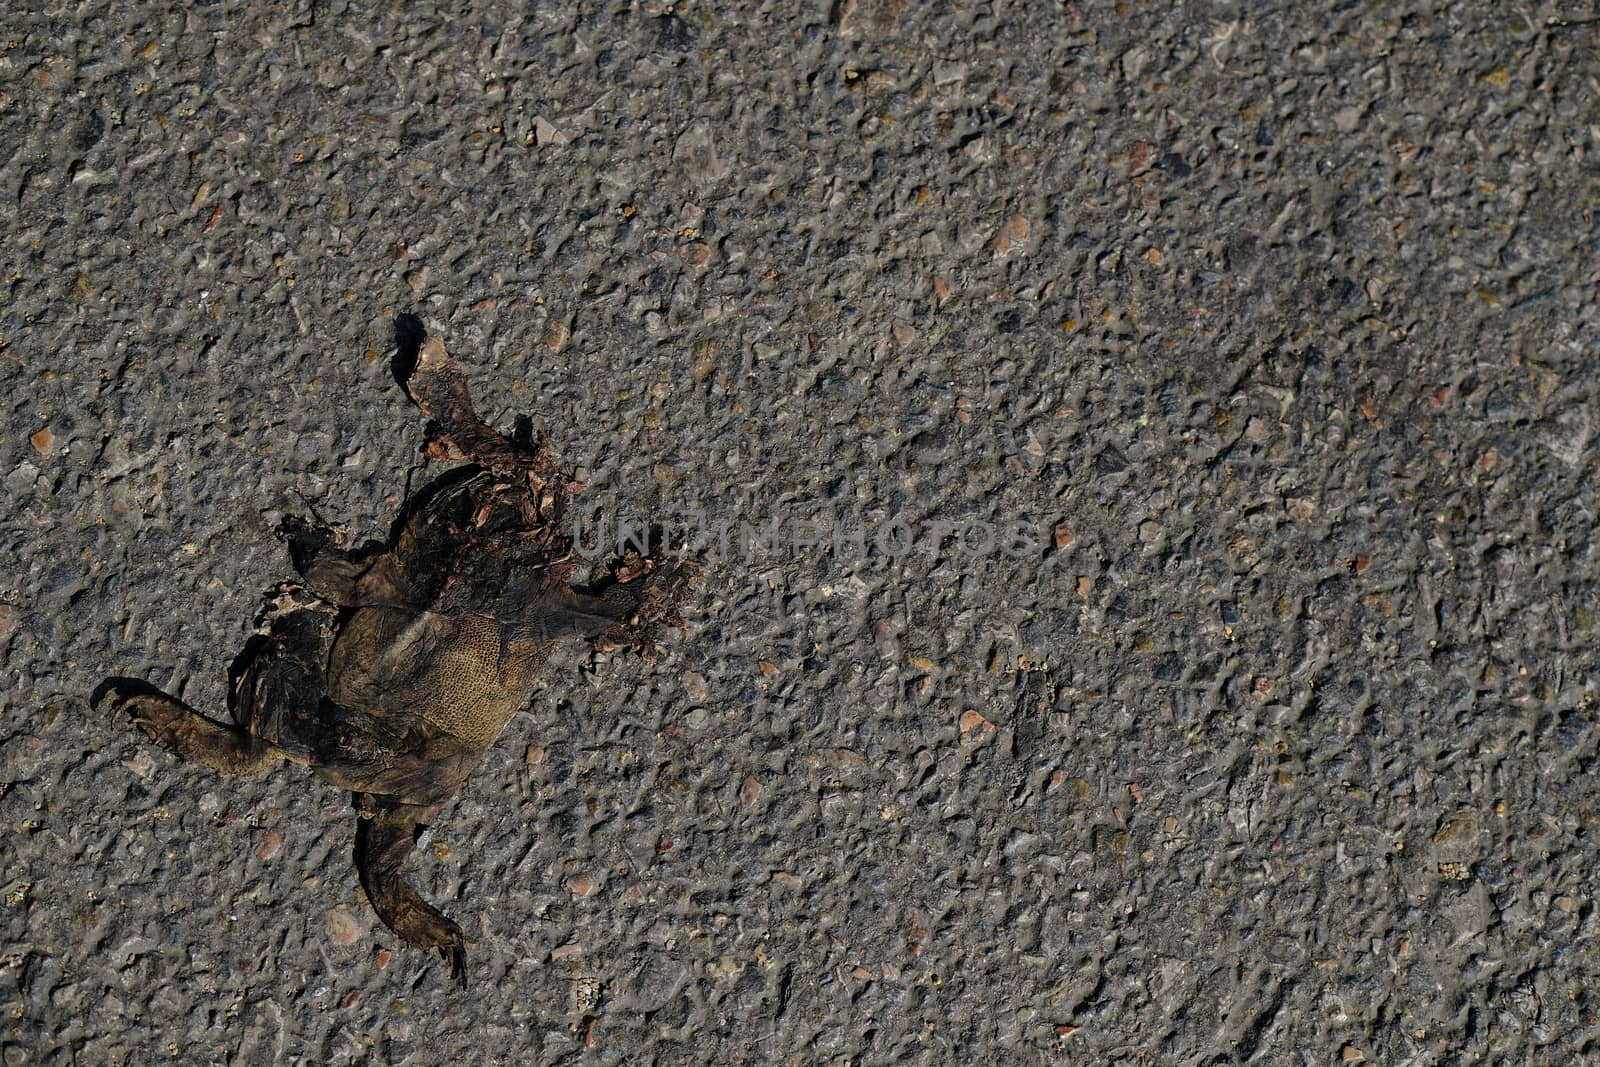 a corspe of a toad, dried out in the sun after being crushed by a car